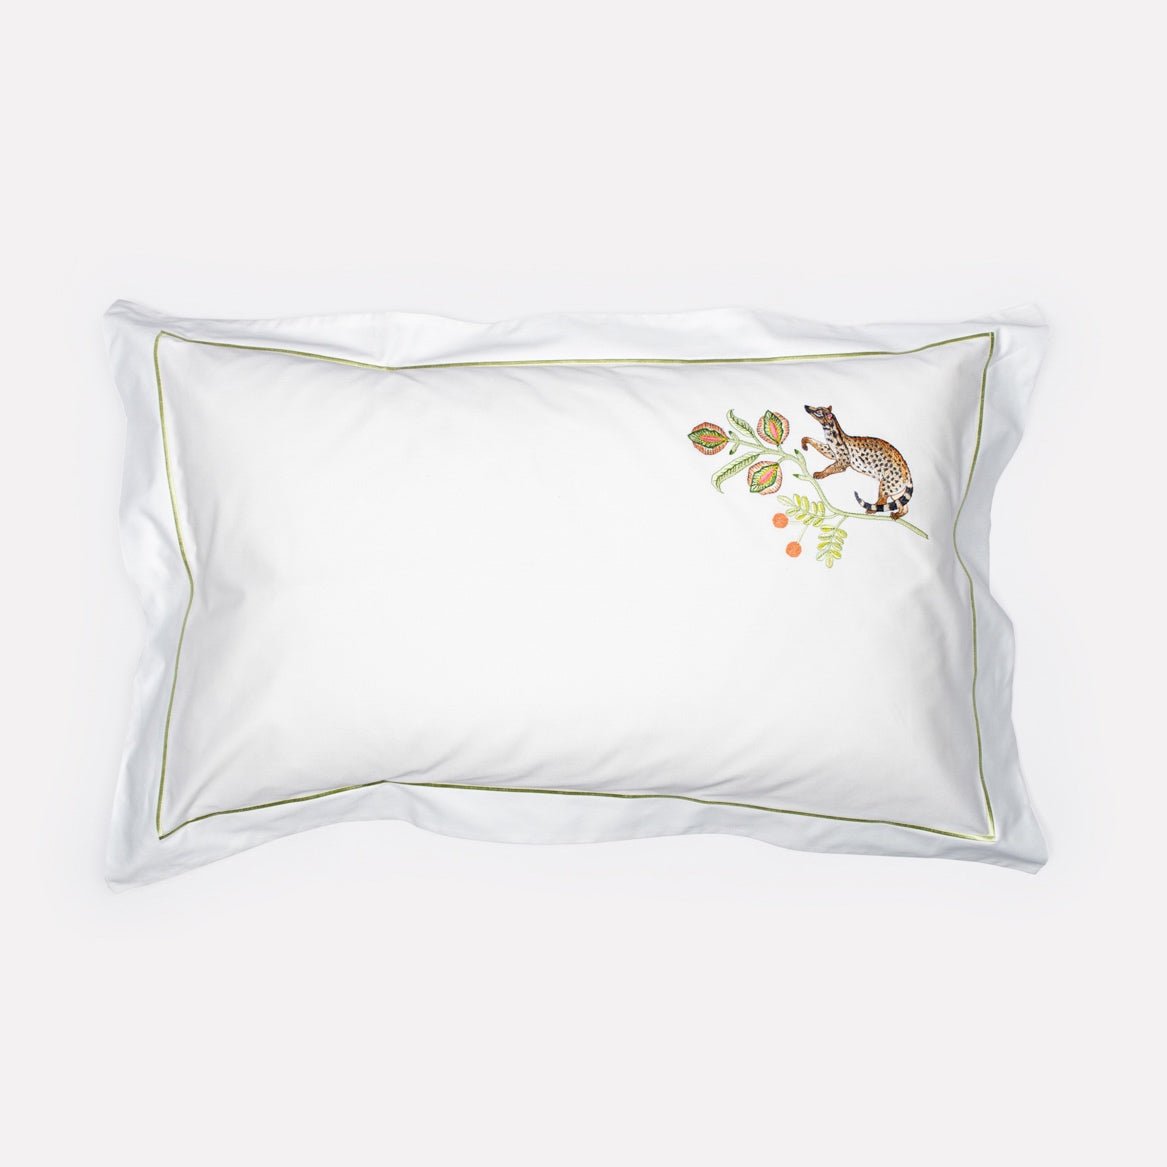 Camp Critters Delta Embroidered Pillow Slips